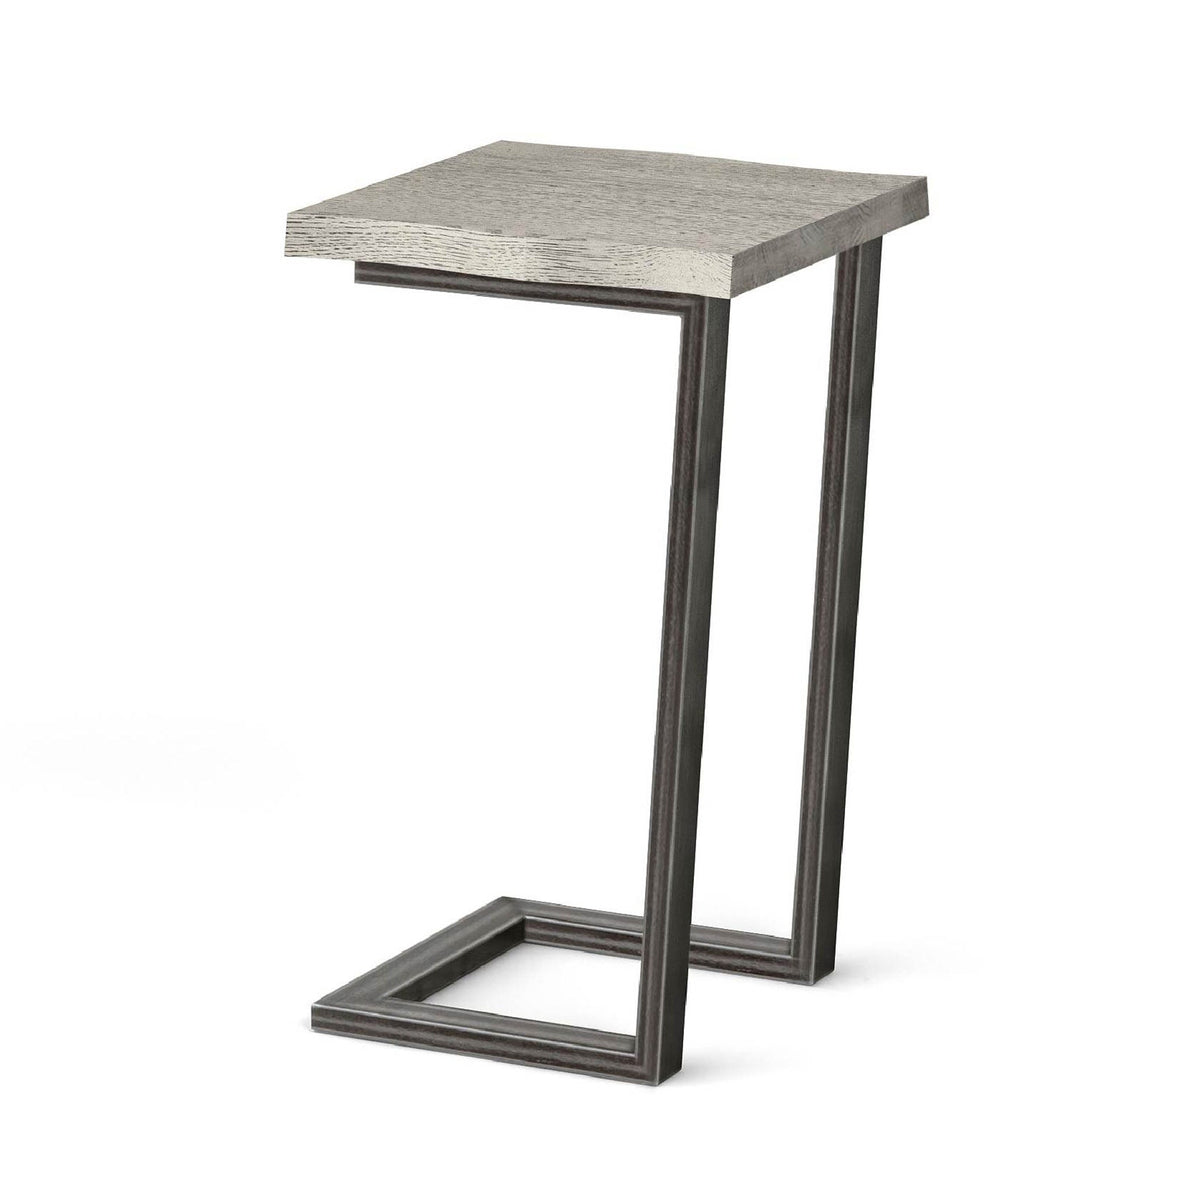 Soho Side Occasional Table - Side view